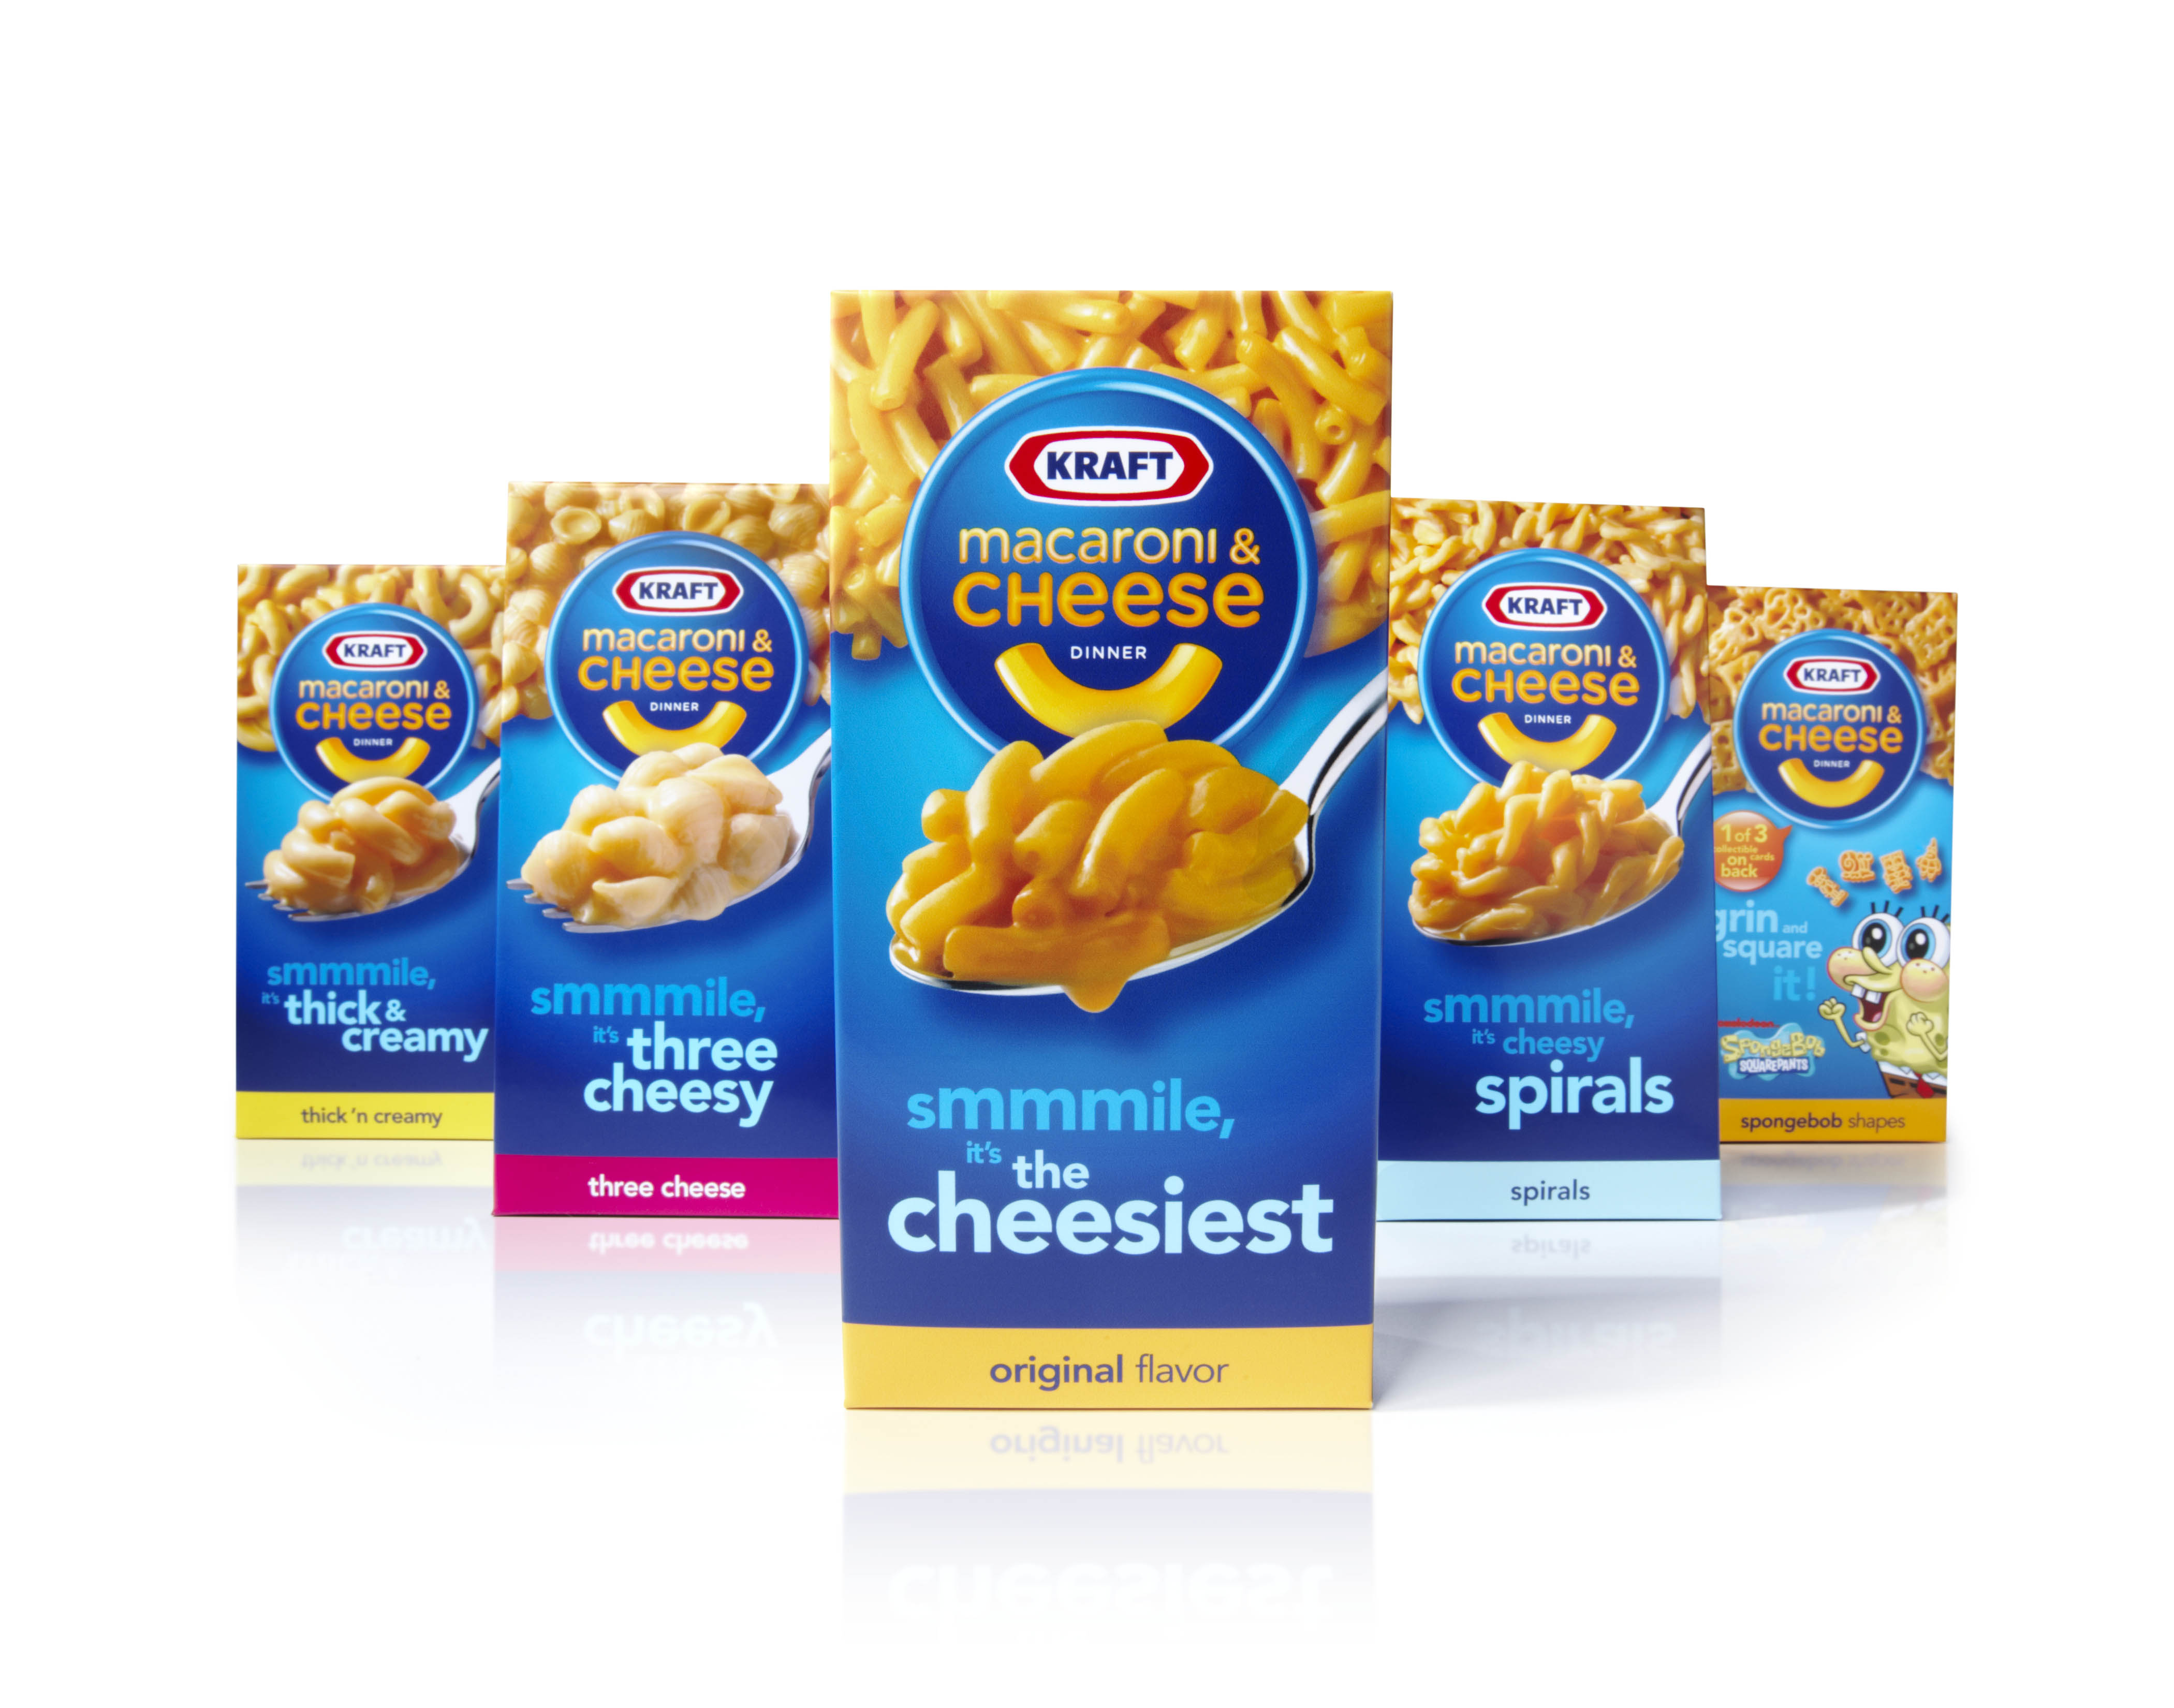 Kraft Macaroni & Cheese Only $0.39 at Publix Until 11/13